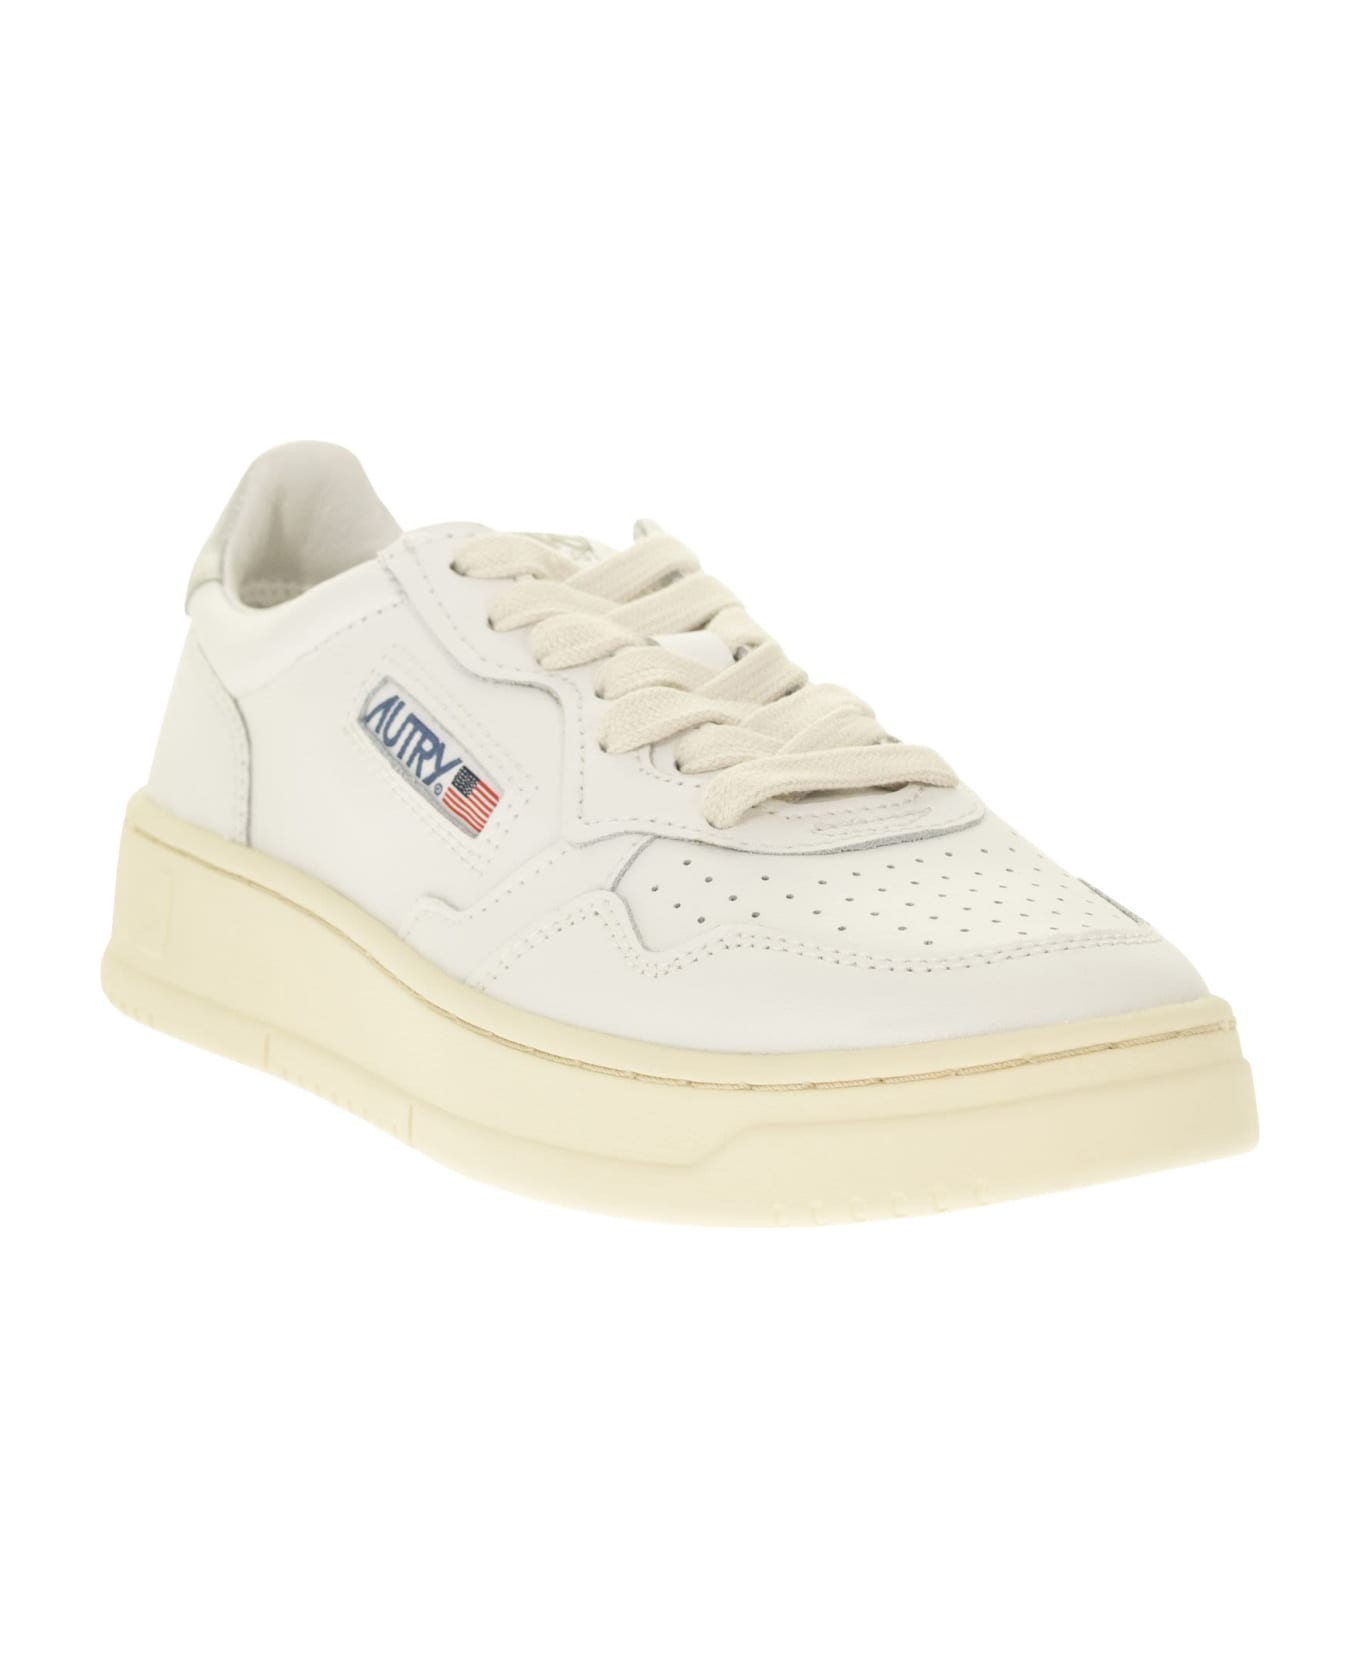 Autry Medalist Low Sneakers In White And Silver Leather - Bianco